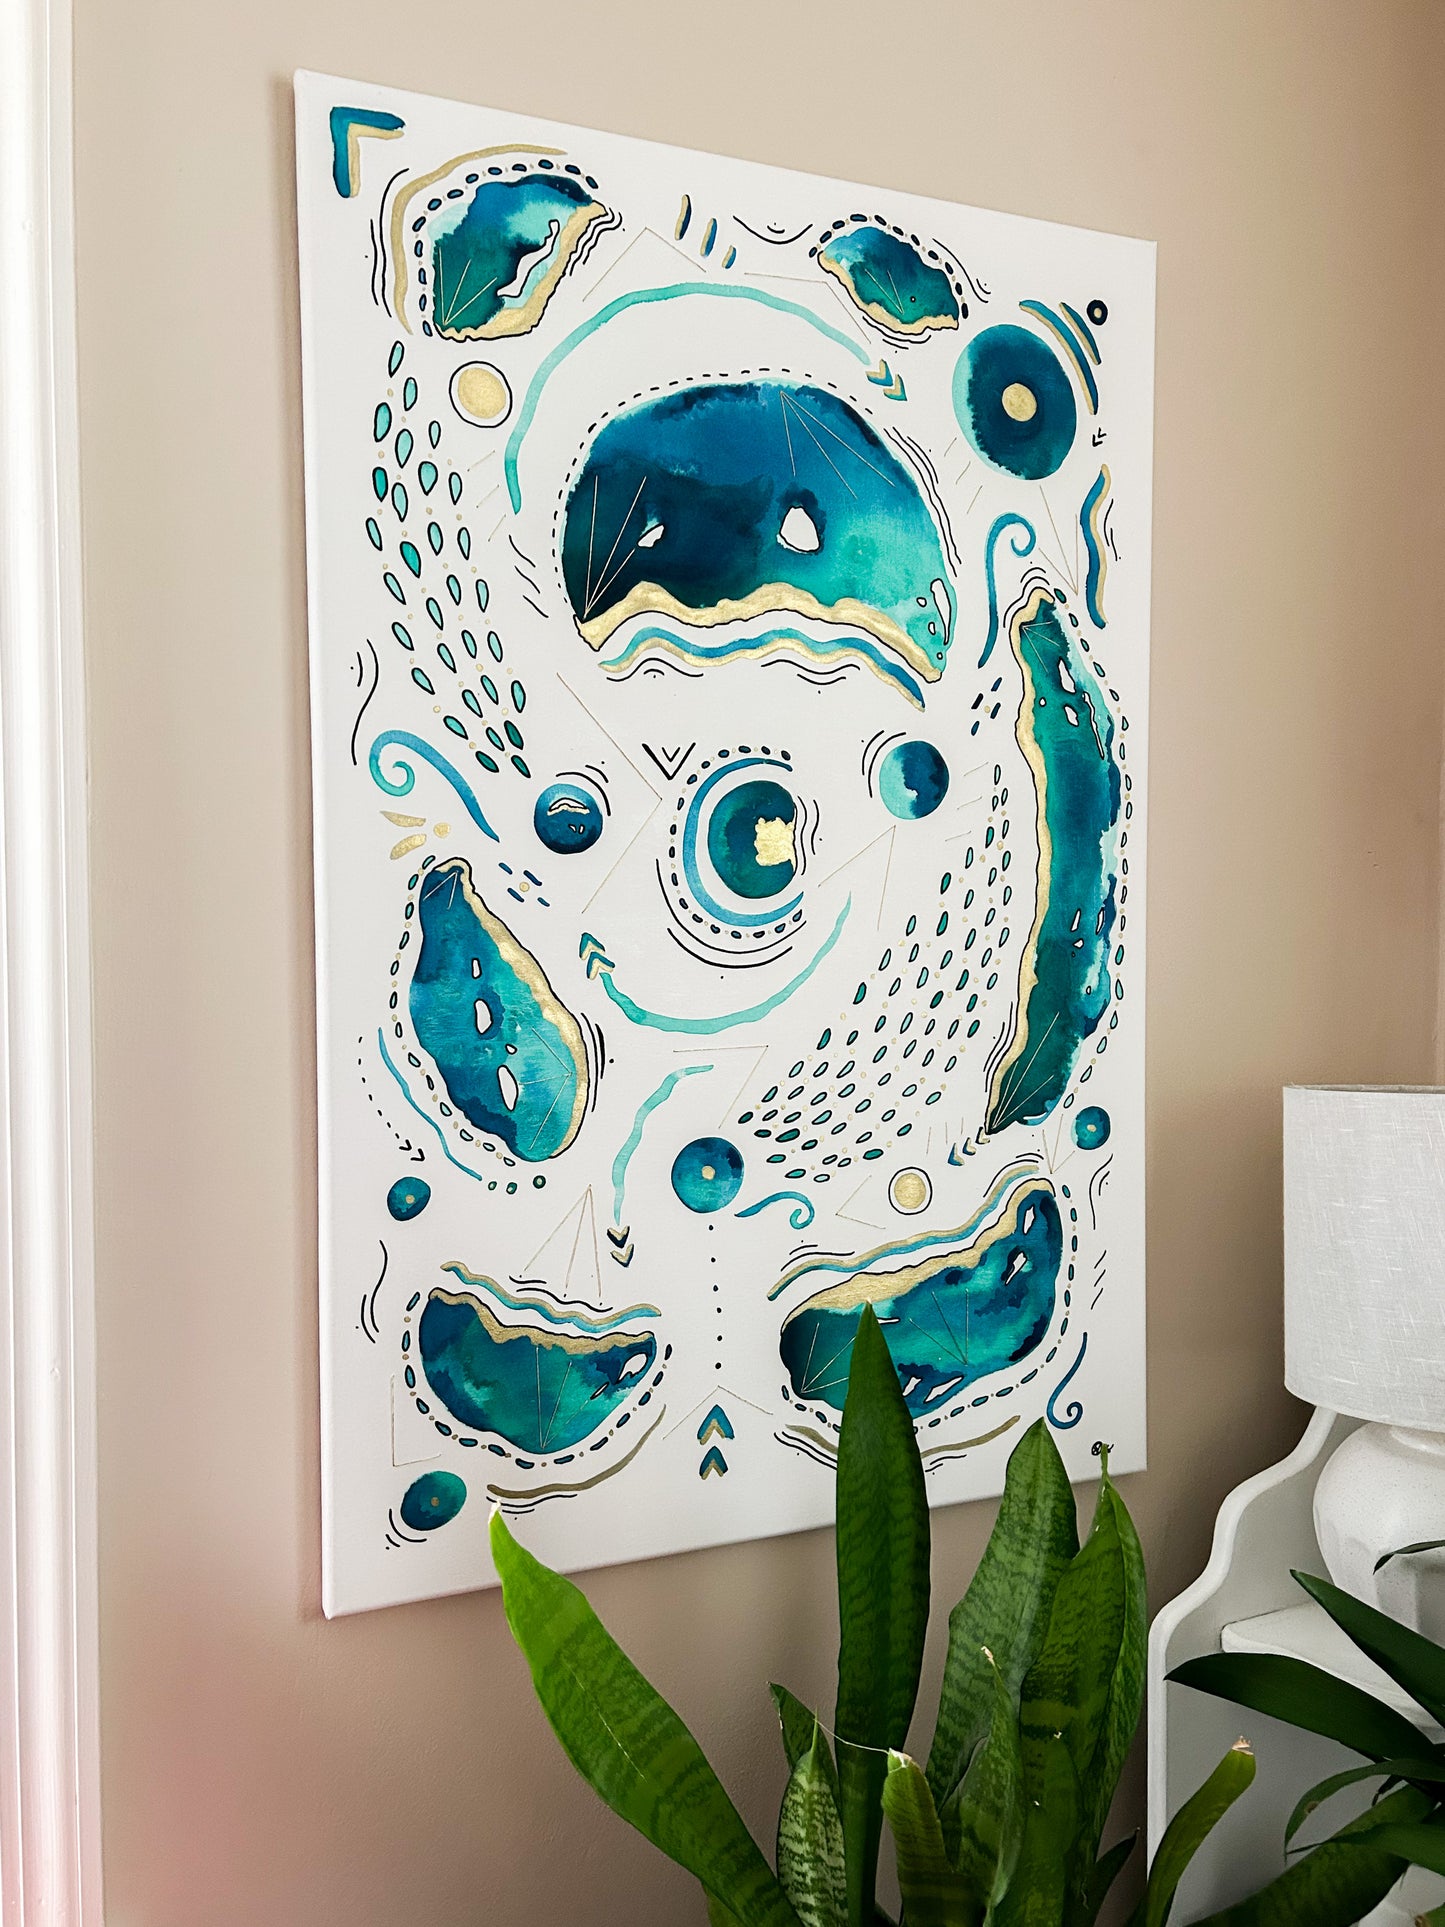 Amado's Reef - Original Watercolor, Ink, & Thread Painting on Canvas - Teal & Gold